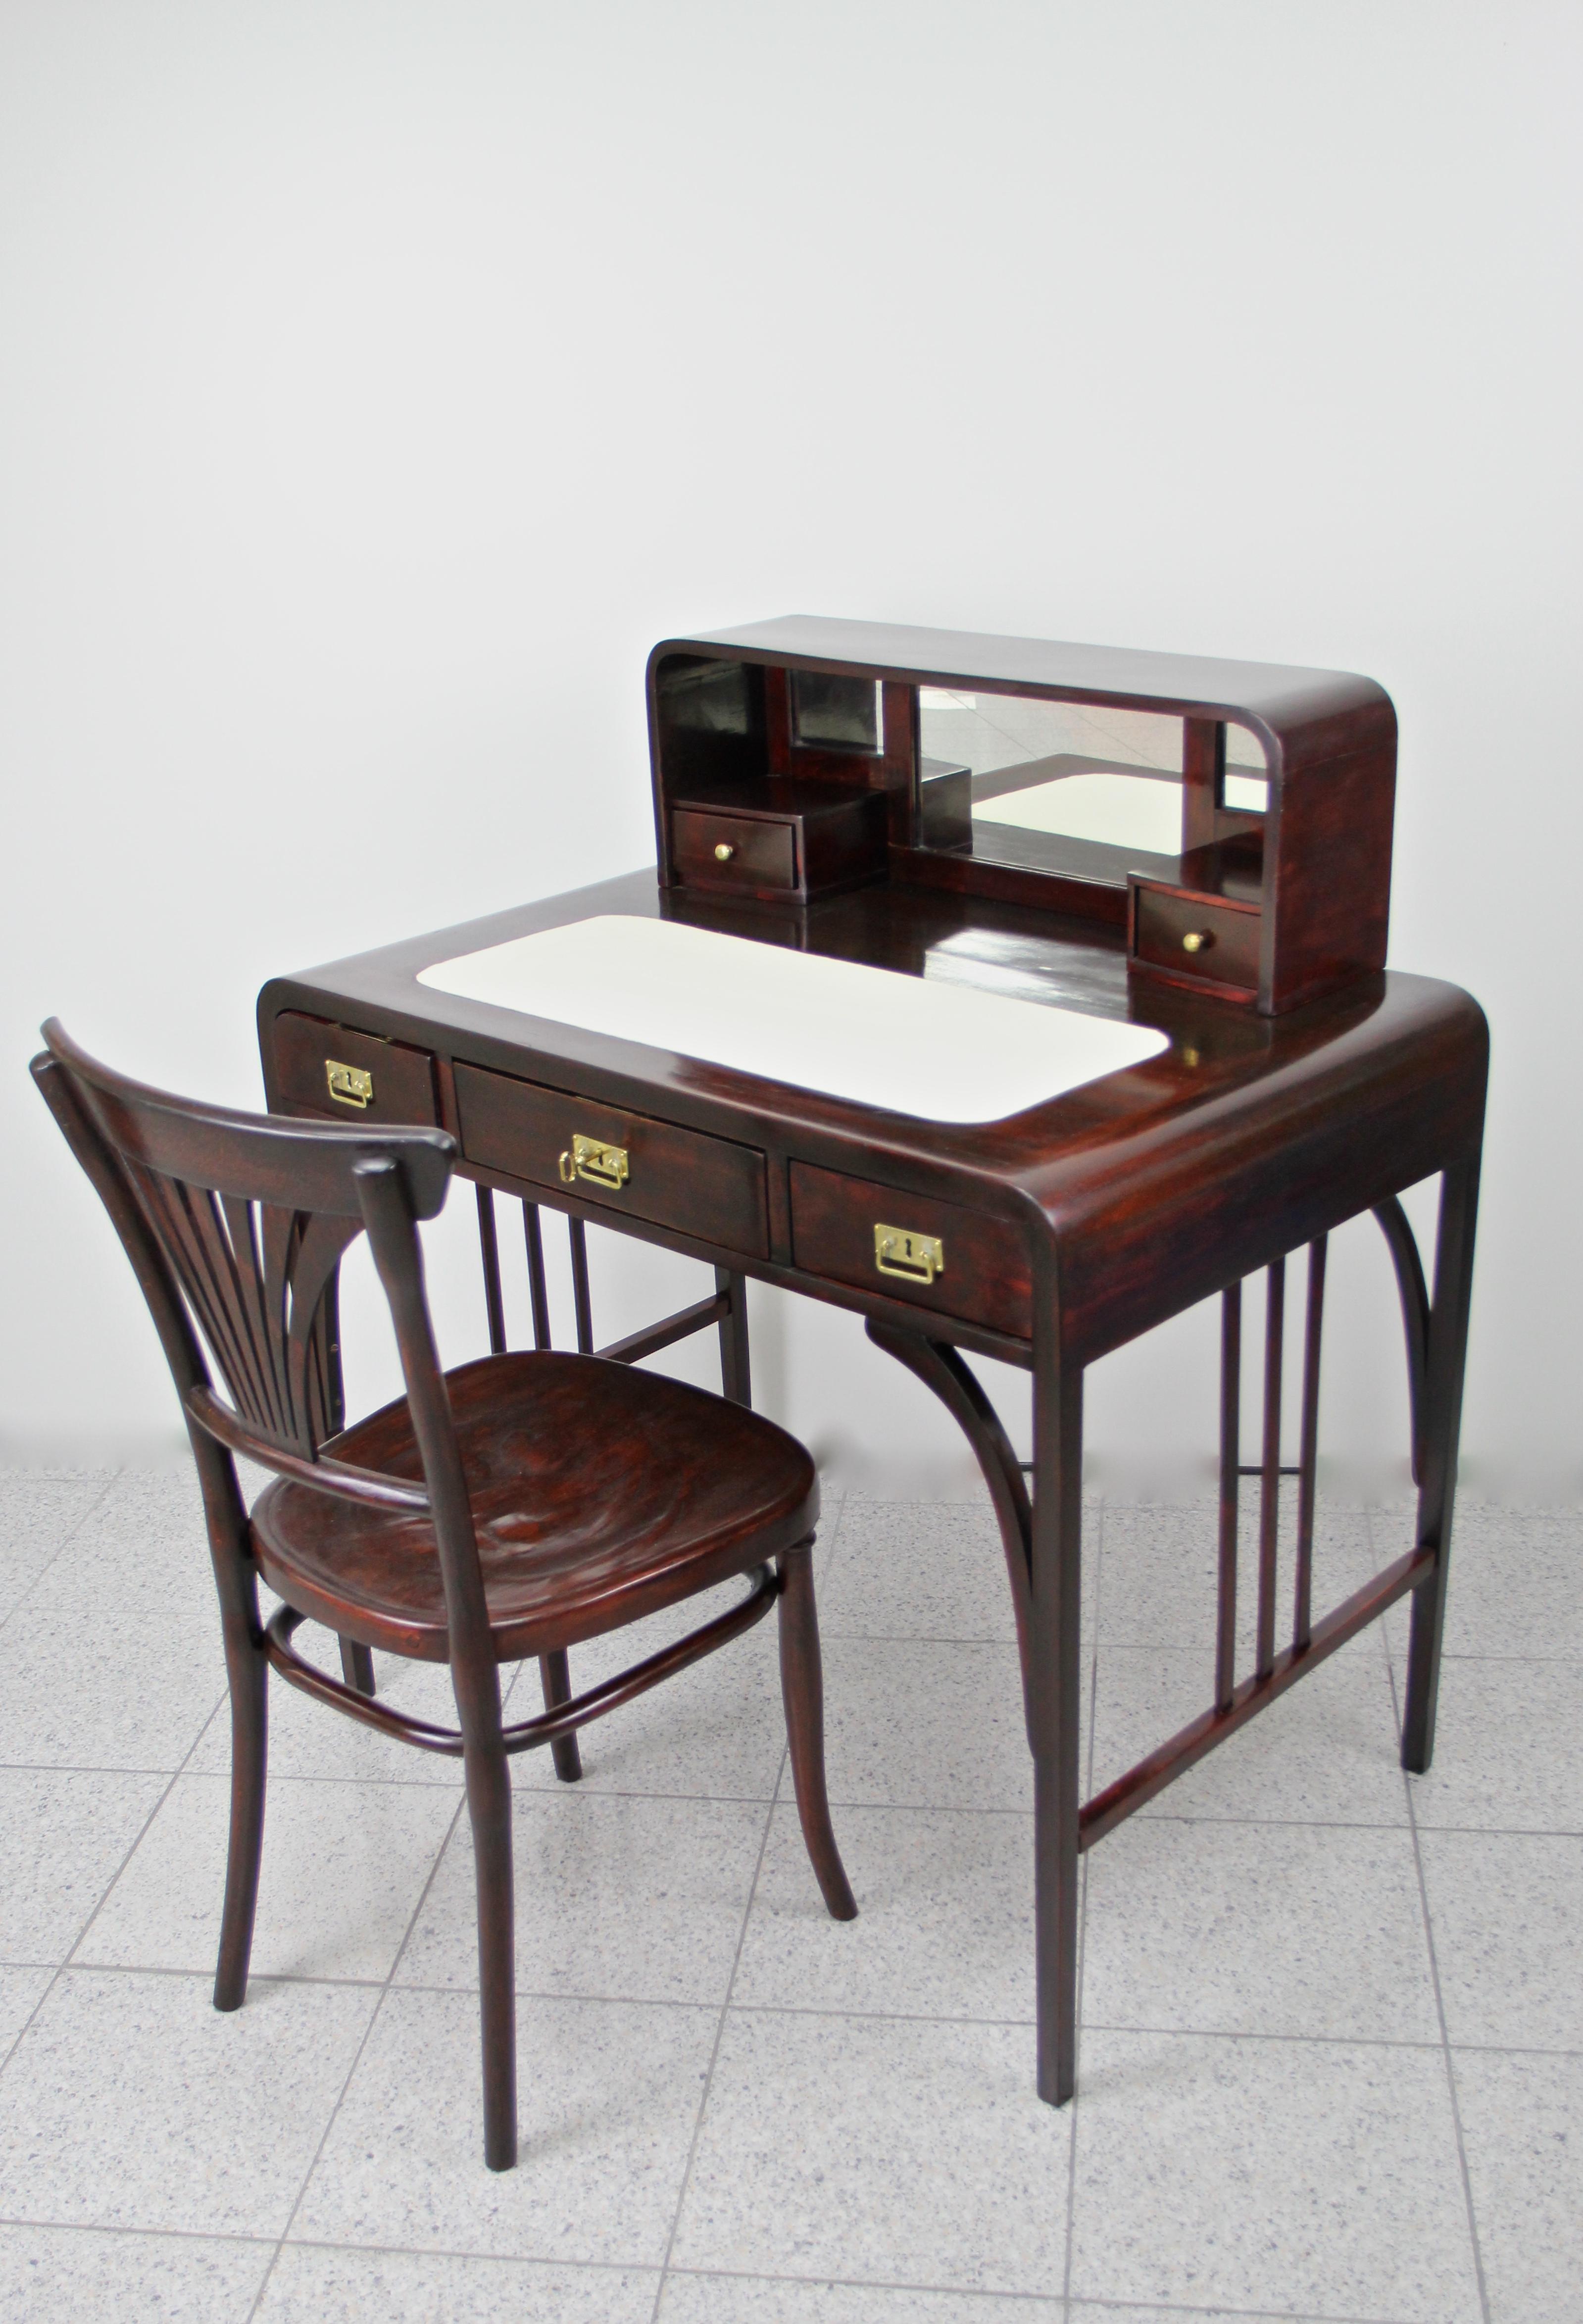 Remarkable Art Nouveau bentwood writing table or desk from circa 1910 in Austria, attributed to Thonet. Made of fine bentwood and trimmed to mahogany, this fantastic writing desk is an absolute masterpiece of design. Incredible shaped lines, rounded